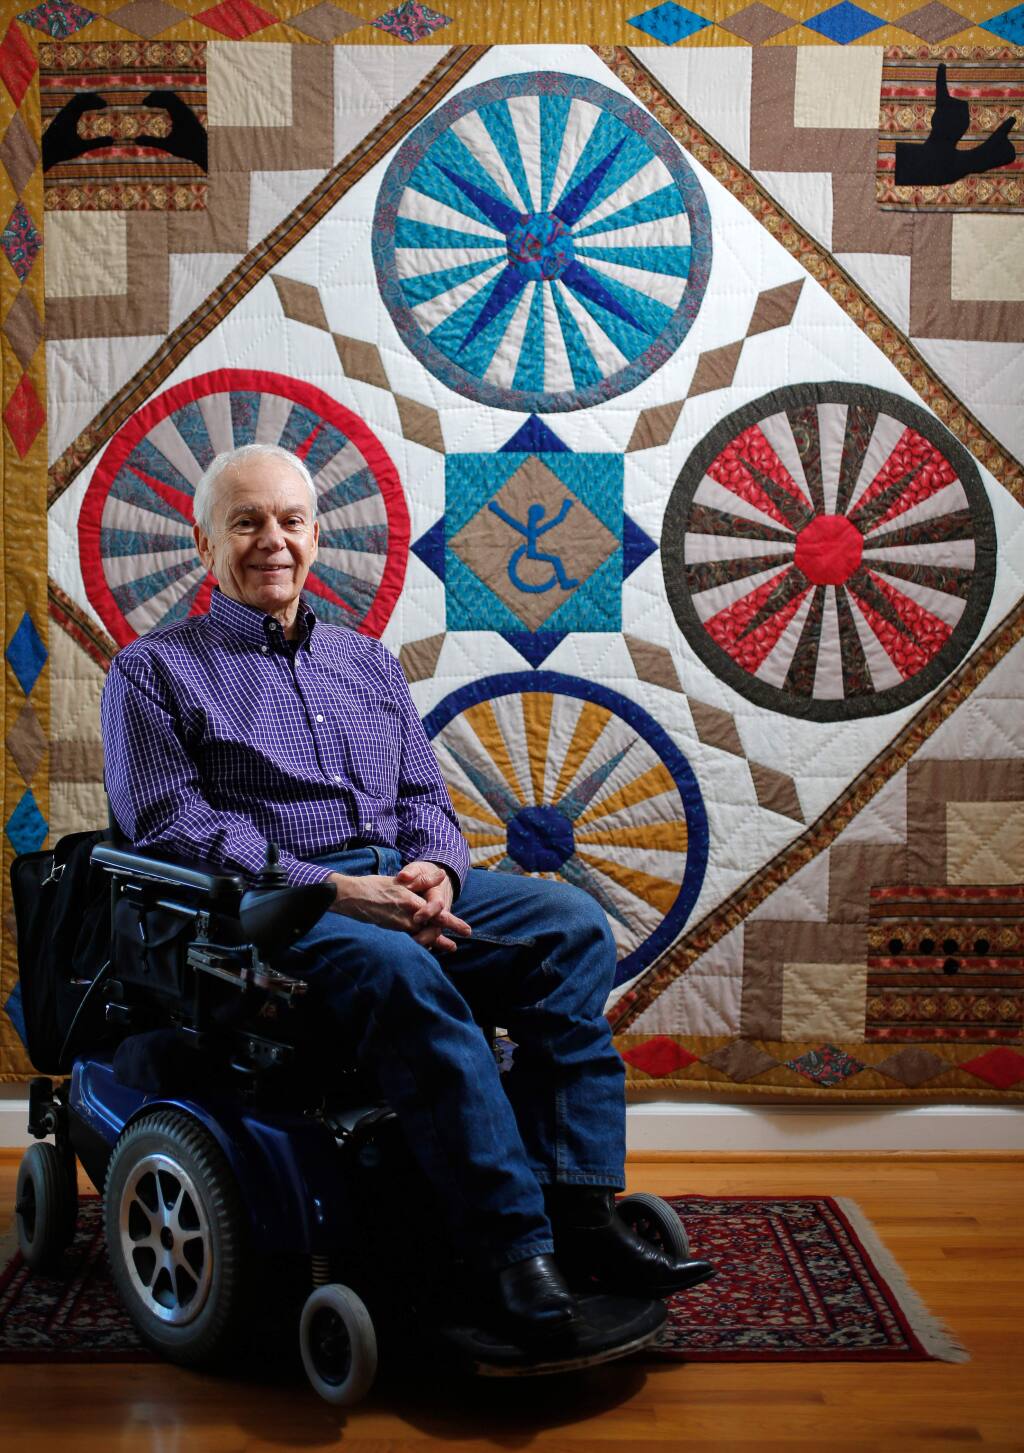 Disability advocate Anthony Tusler in front of a disability-themed quilt at his home in Penngrove on Friday, Nov. 6, 2015. (Alvin Jornada / The Press Democrat)